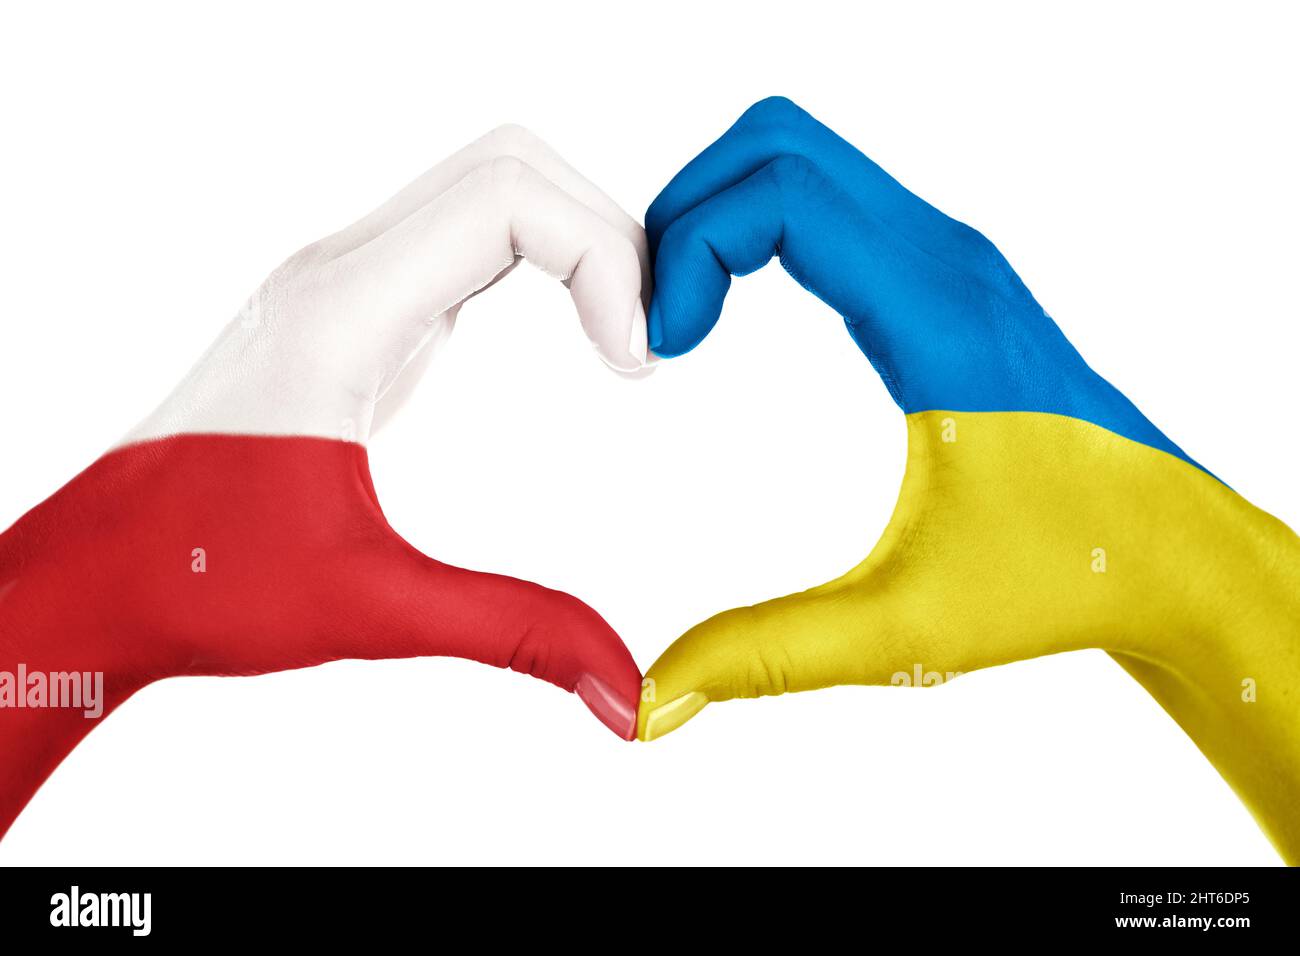 Human hands, painted in the Poland and Ukraine flags,  forming heart shape isolated on white background Stock Photo